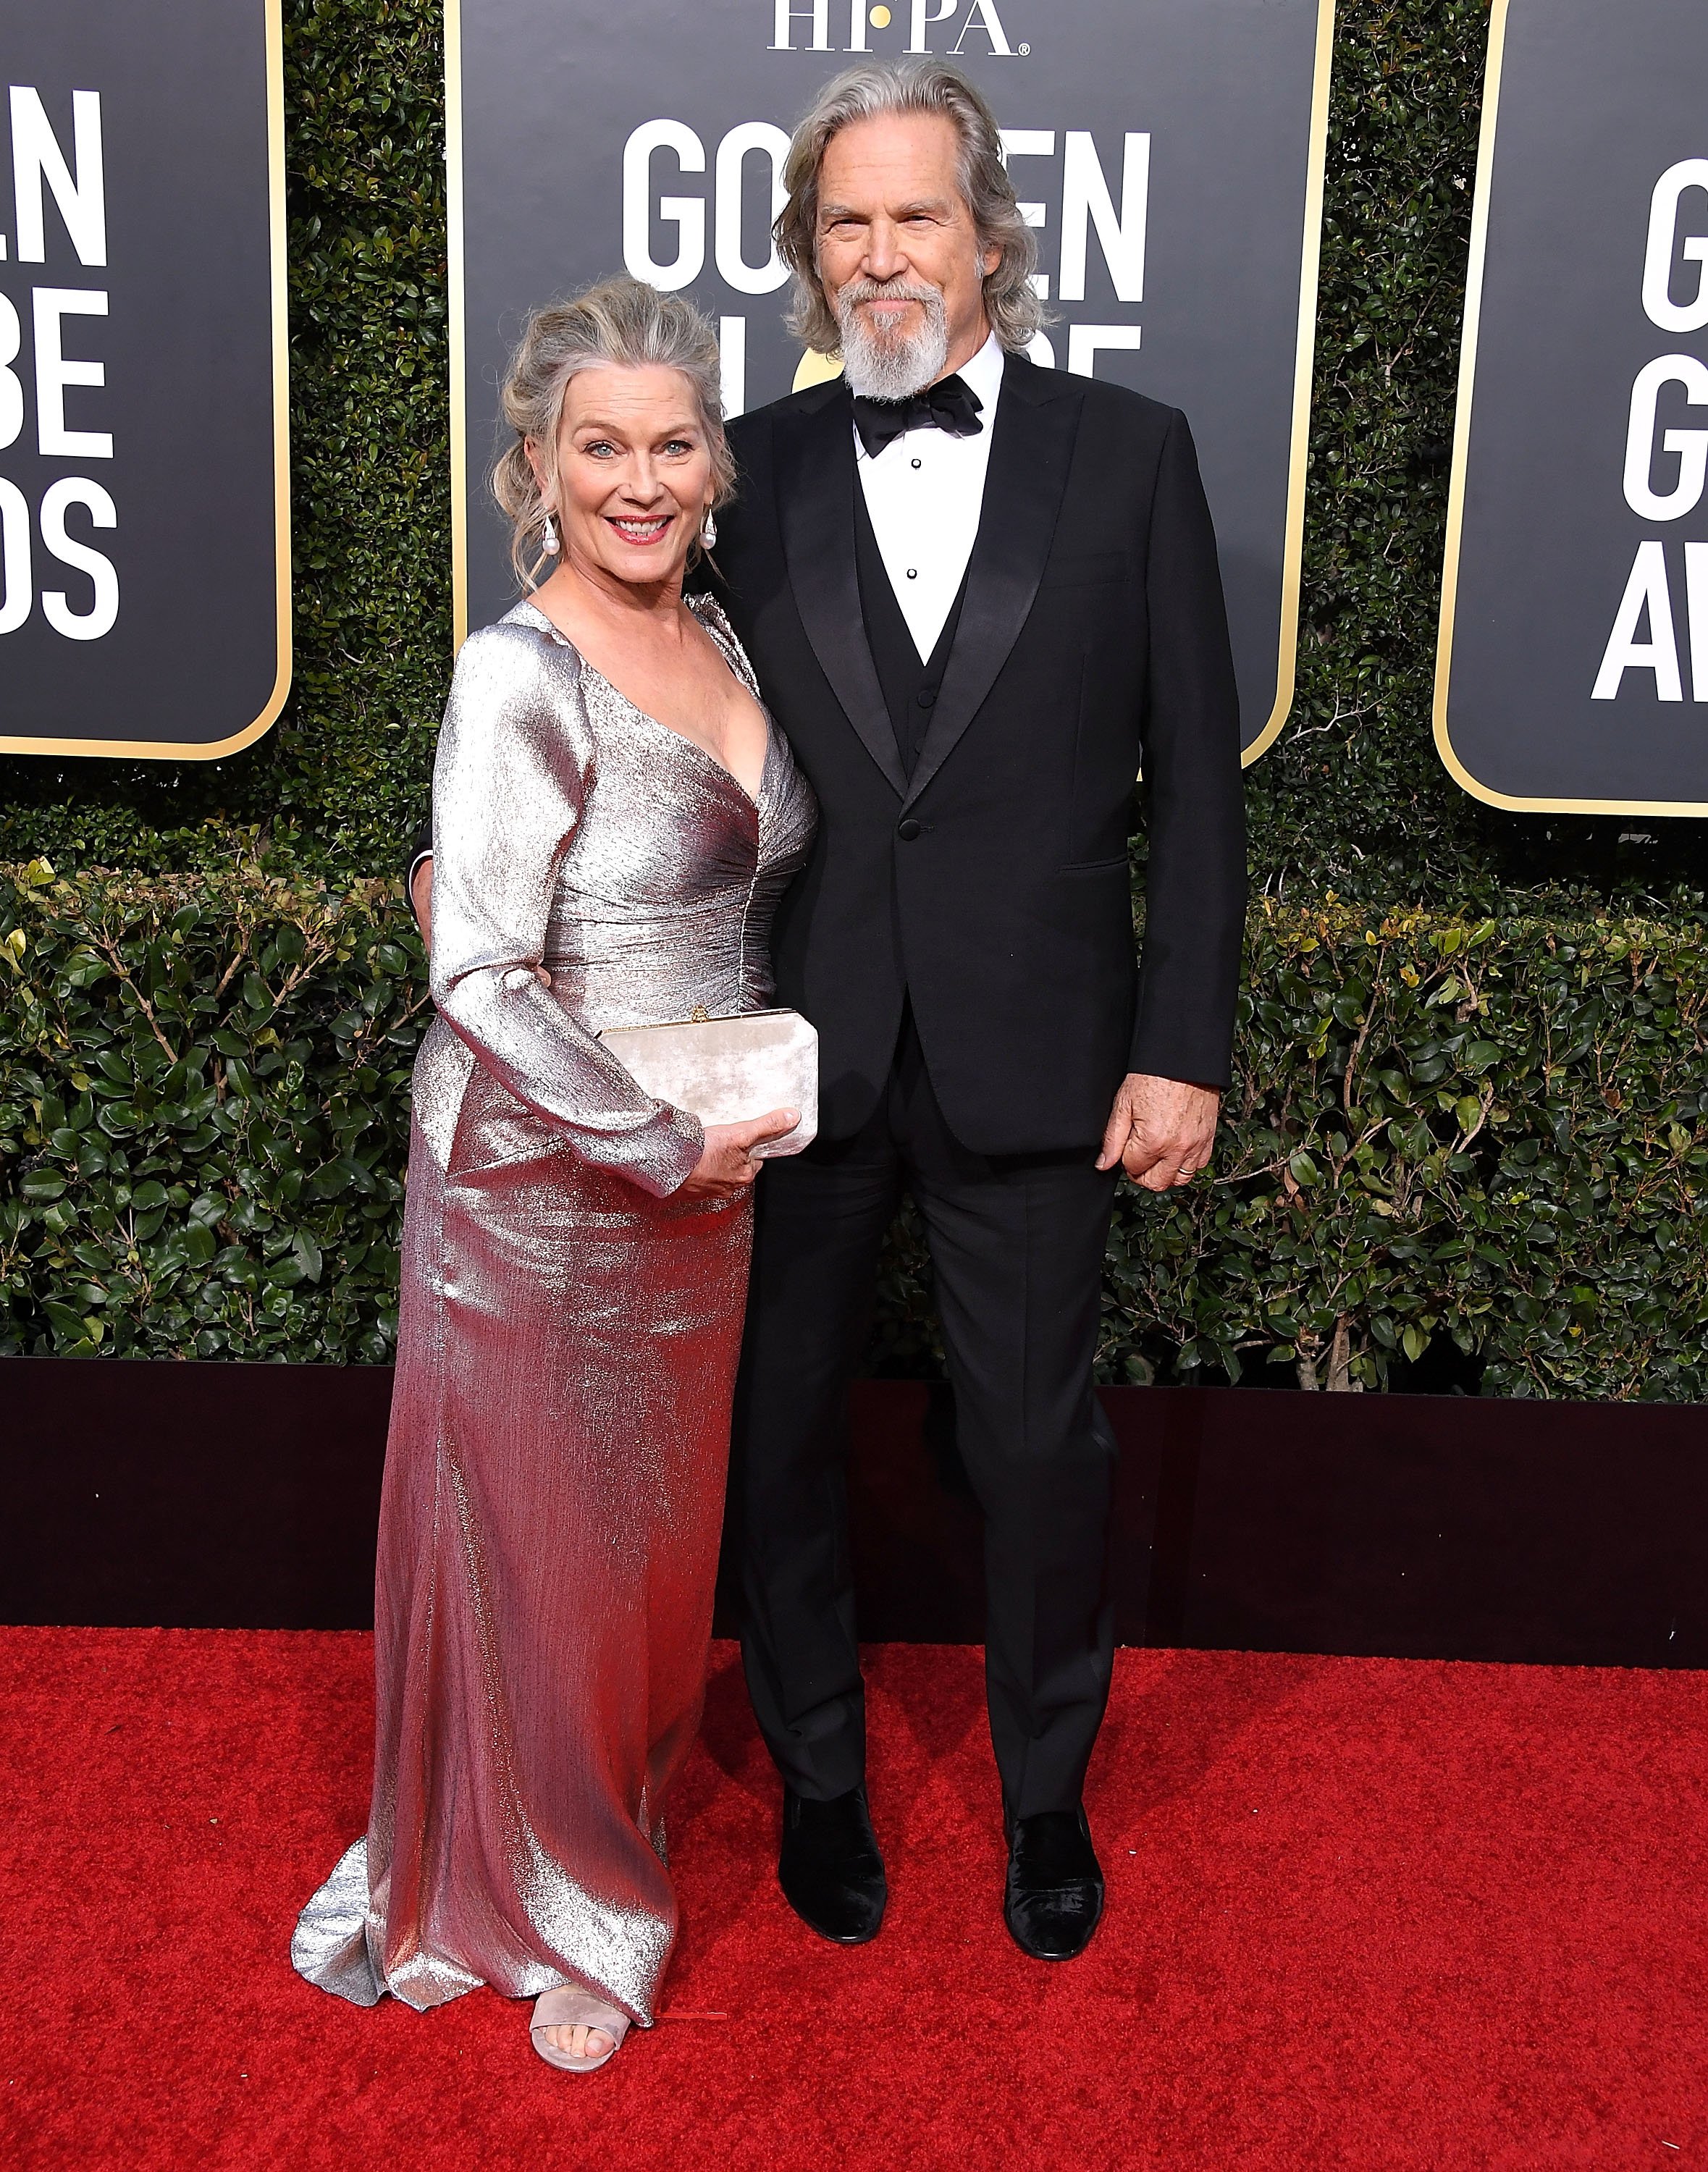 Susan Geston and Jeff Bridges arrive at the 76th Annual Golden Globe Awardsat The Beverly Hilton Hotel on January 6, 2019 in Beverly Hills, California. | Source: Getty Images